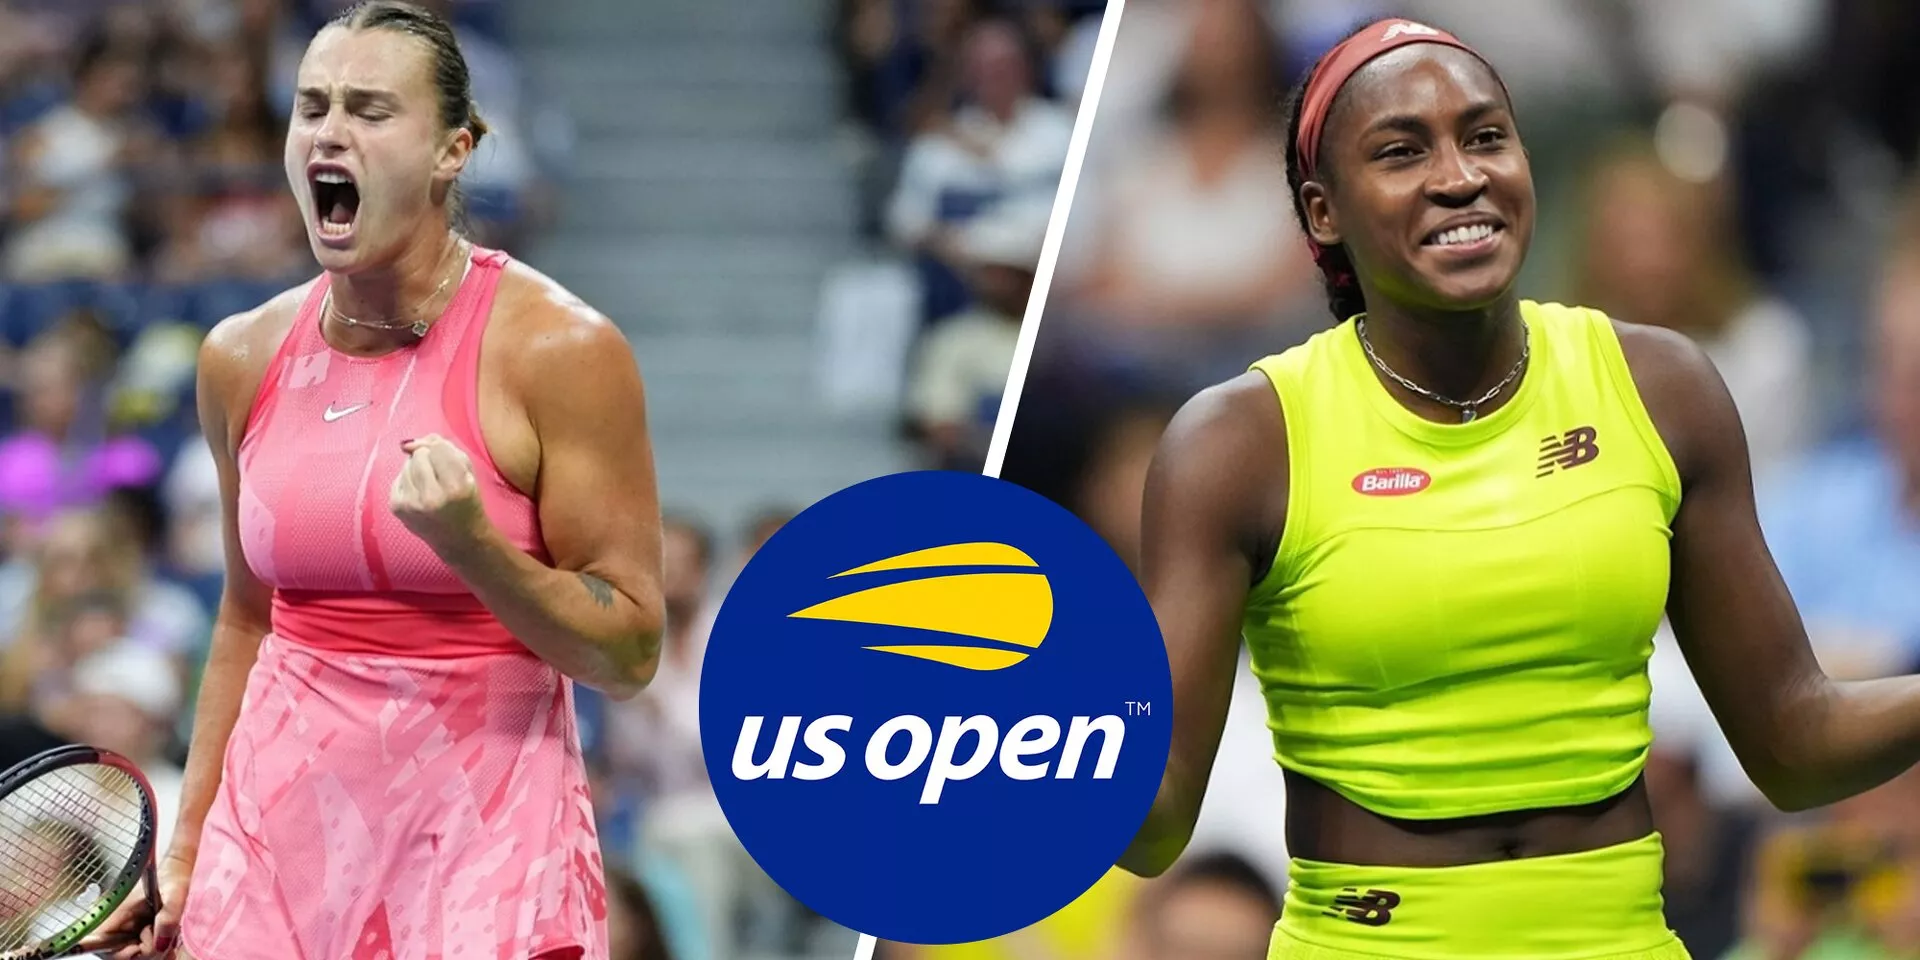 US Open 2023 Where and how to watch Coco Gauff vs Aryna Sabalenka womens singles final live in India?